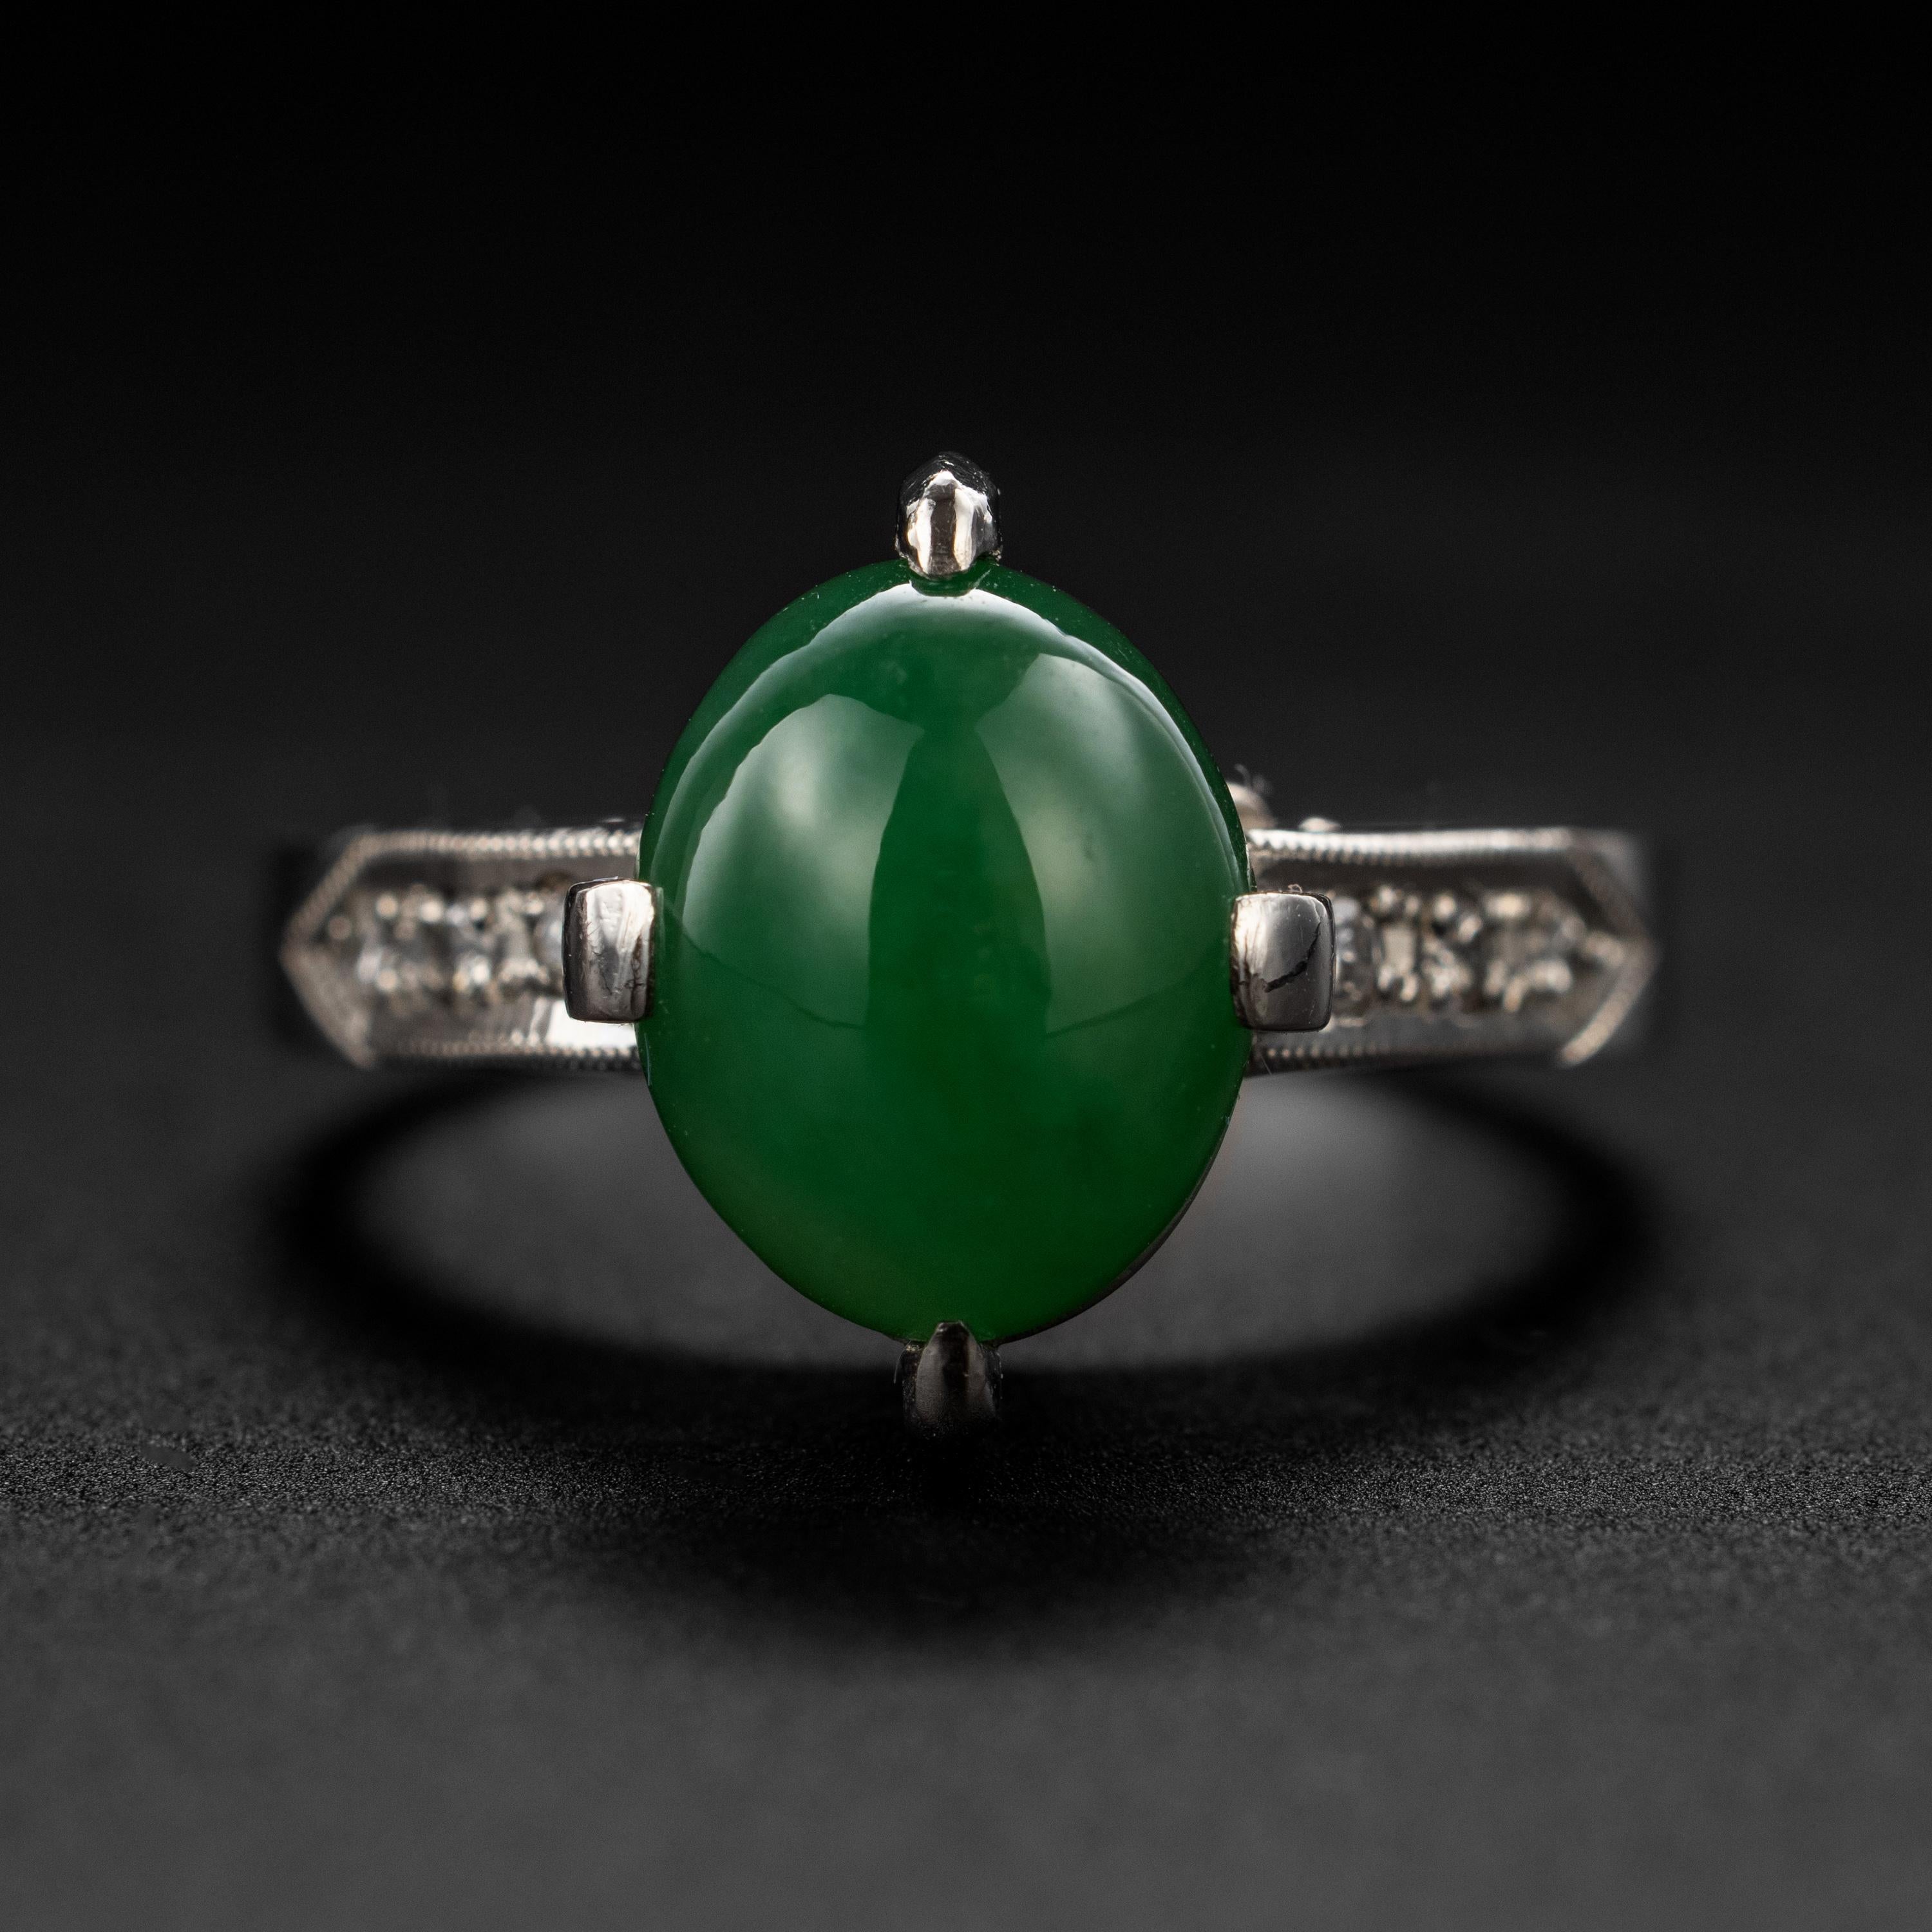 This Jade Ring & Diamond Ring in Platinum is iconic.

A beautifully simple and classic jade solitaire ring from the 1950s. Featuring a lush emerald-green cabochon of jadeite jade that has been GIA-certified natural and untreated, this stunning ring